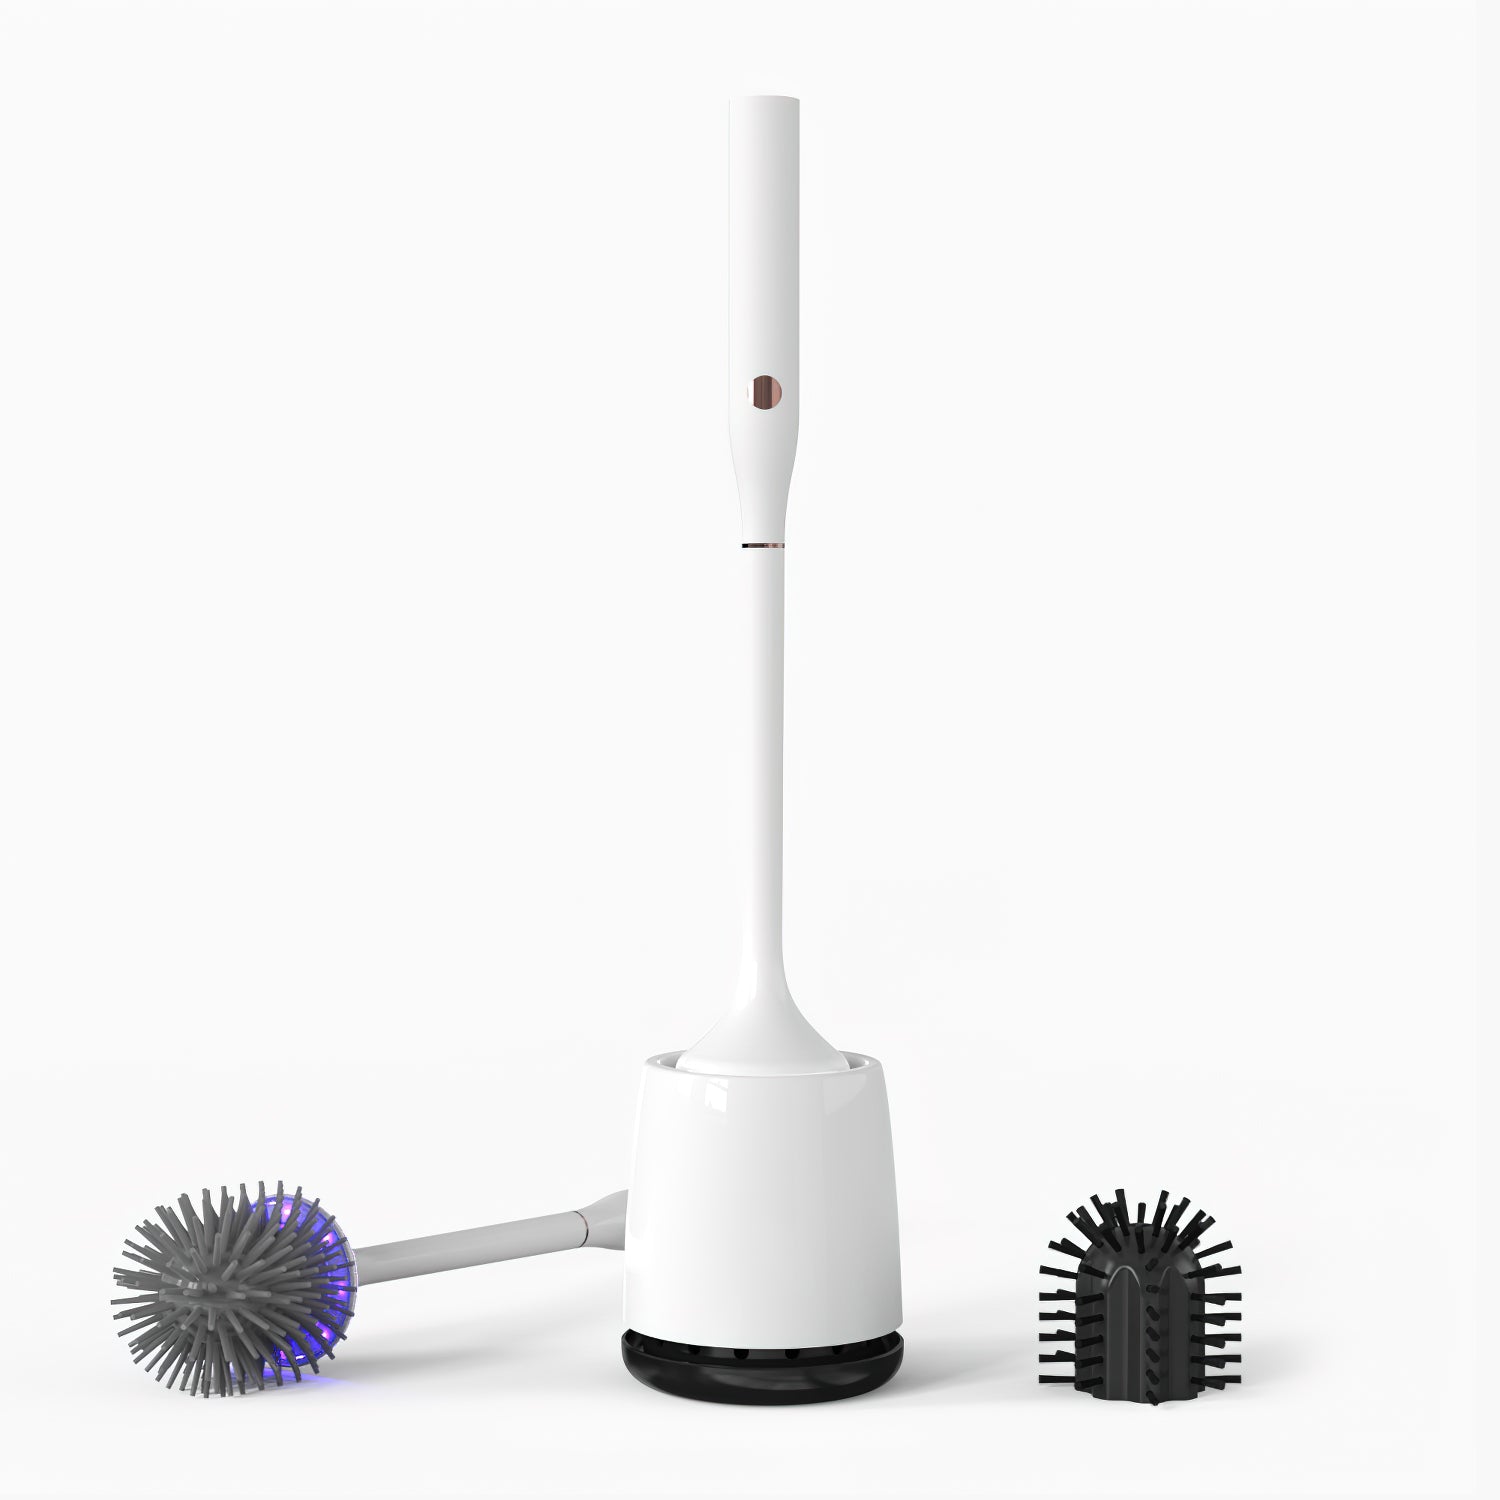 Multifunctional electric cleaning brush – caca